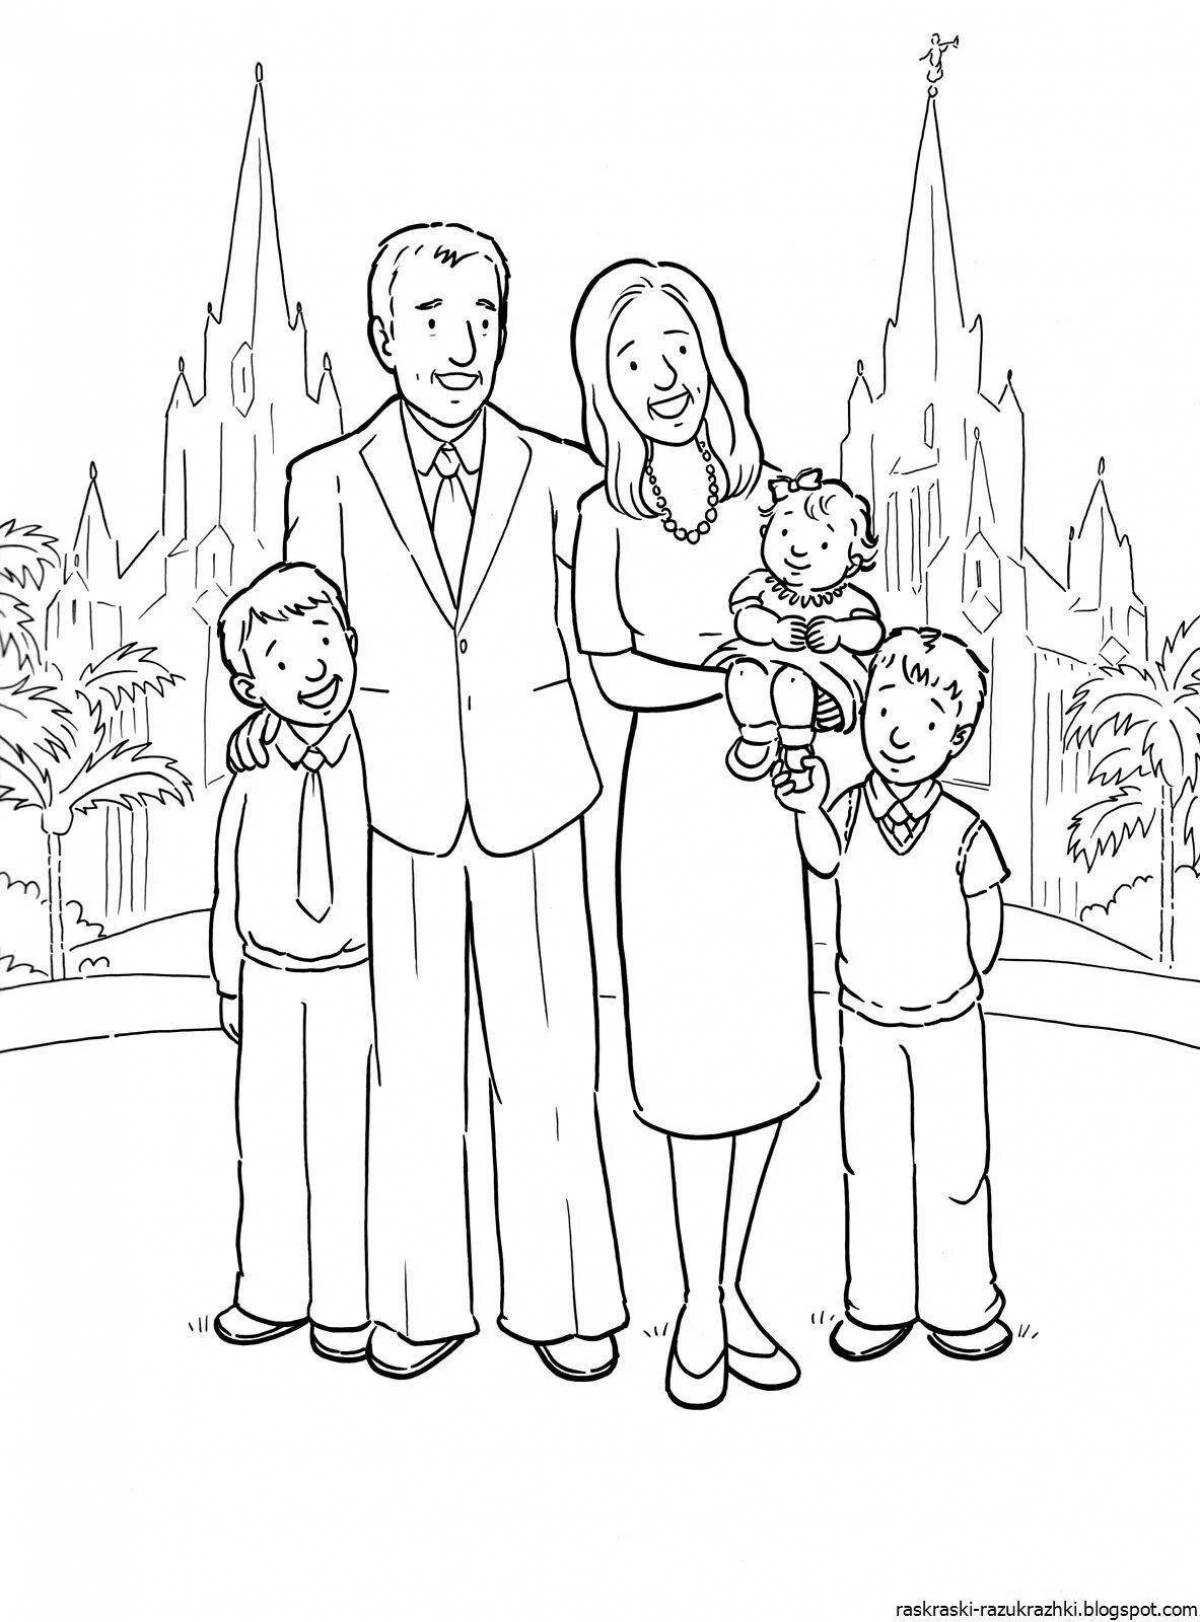 Live family coloring book for kids